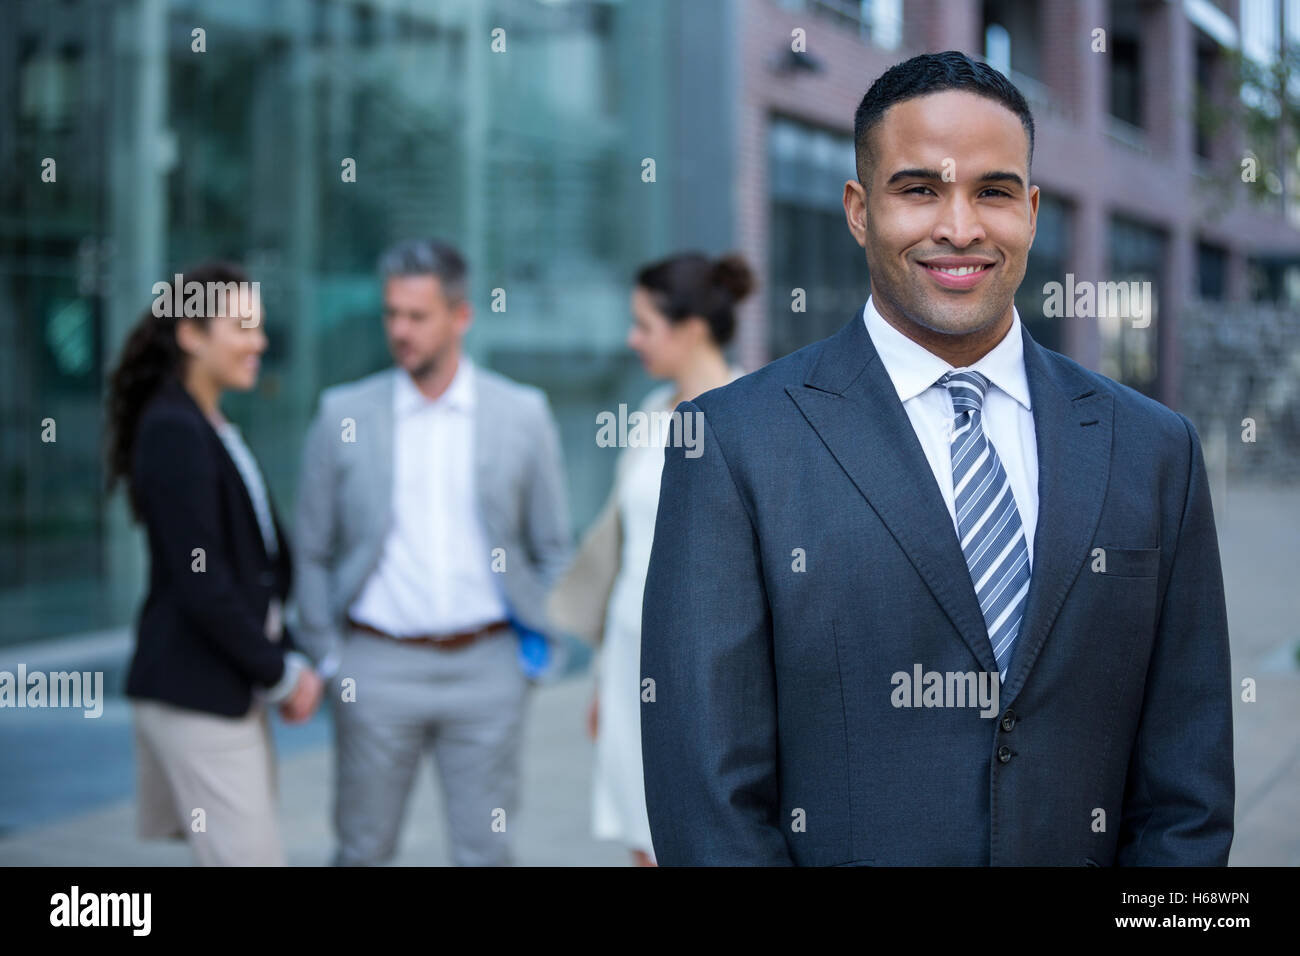 Smiling businessman standing in office building Banque D'Images